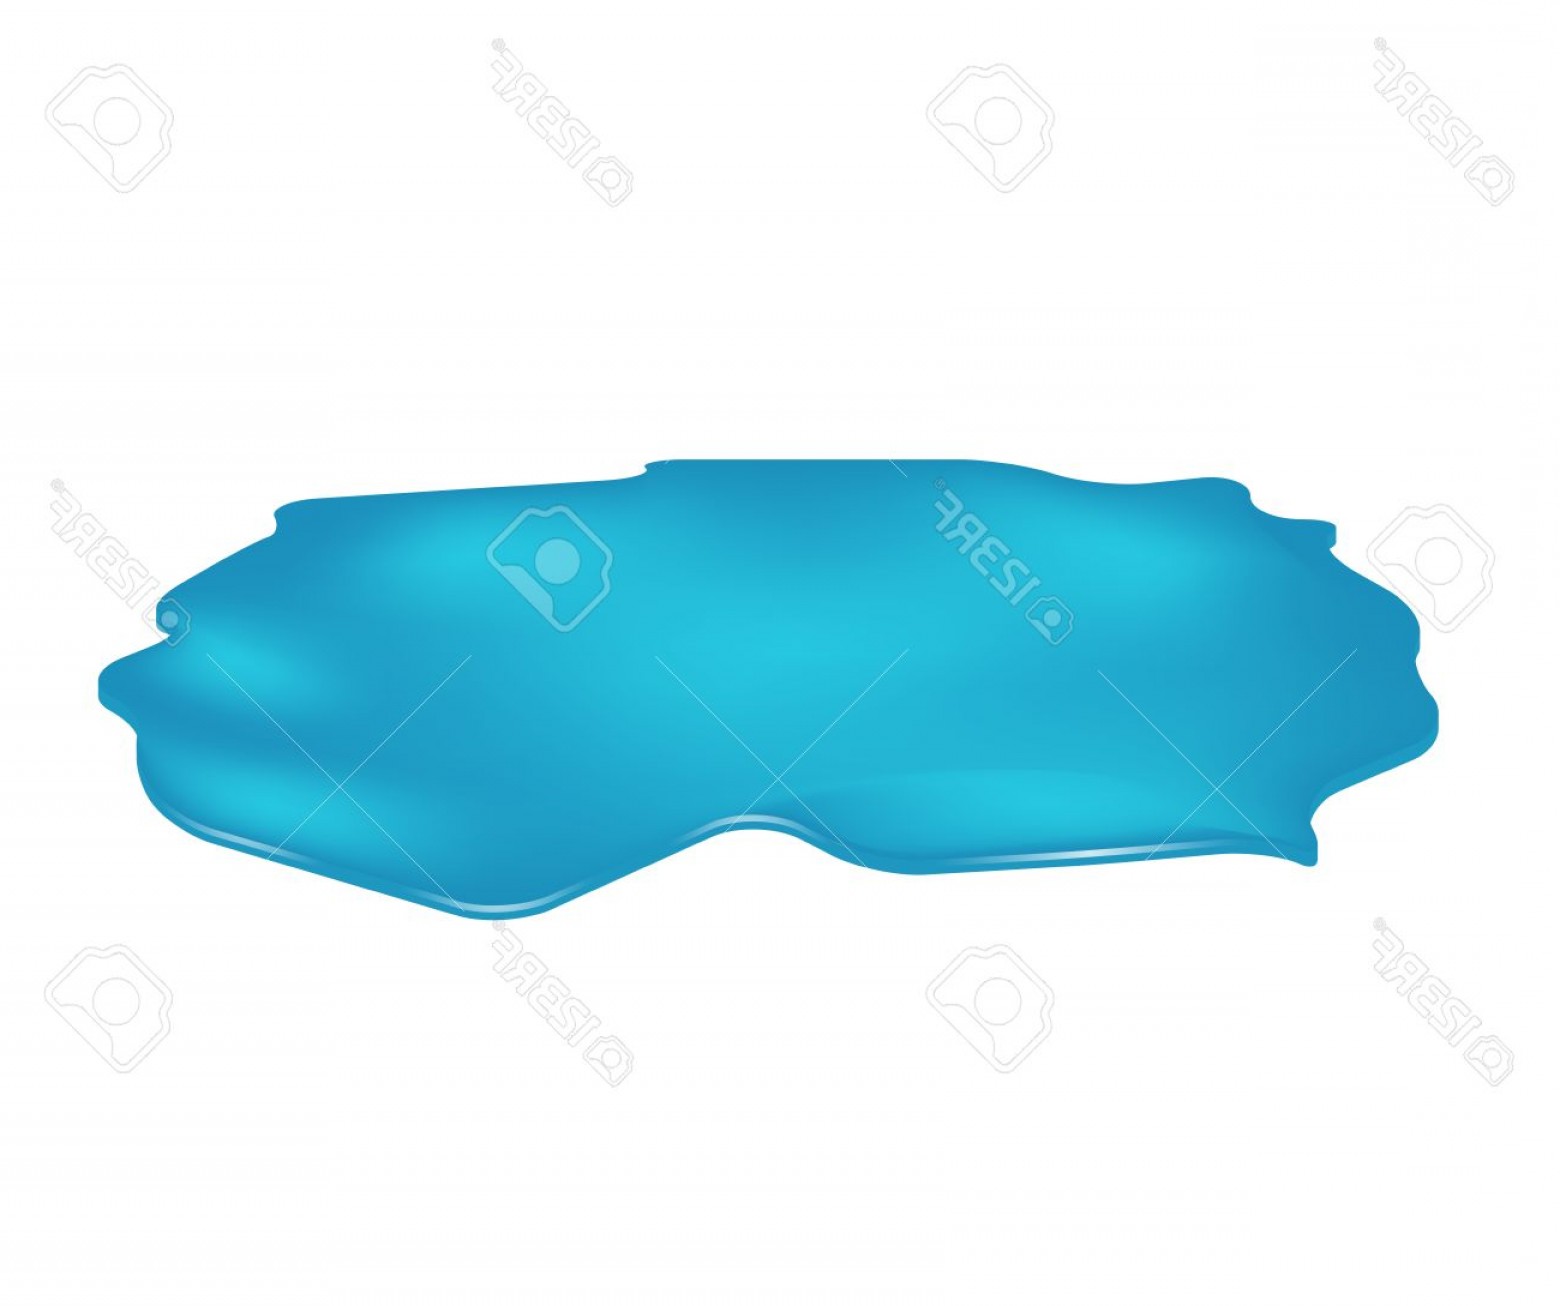 Photostock Vector Puddle Of Water Spill Clipart Blue Stain.